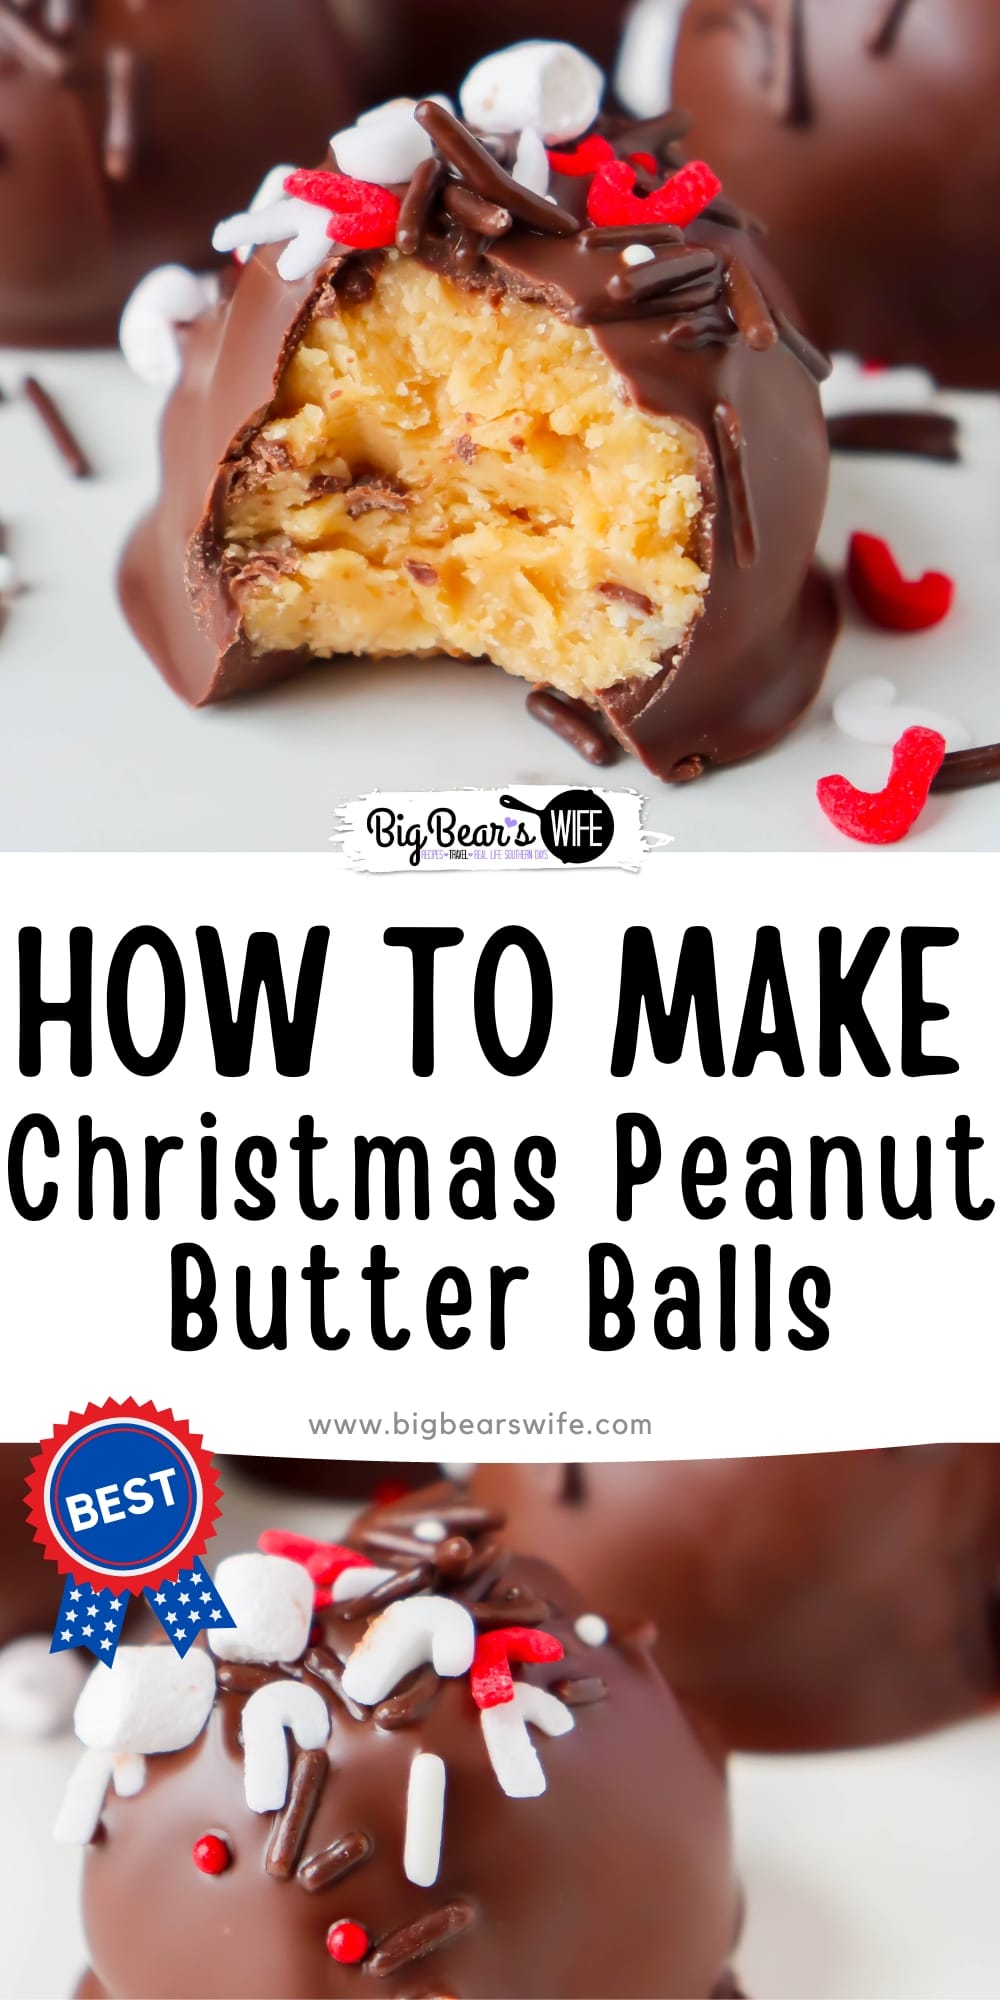 These Christmas Peanut Butter Balls might be the easiest Christmas dessert that you can make around the holidays. 3 ingredient and some sprinkles are all you need for this sweet treat. via @bigbearswife